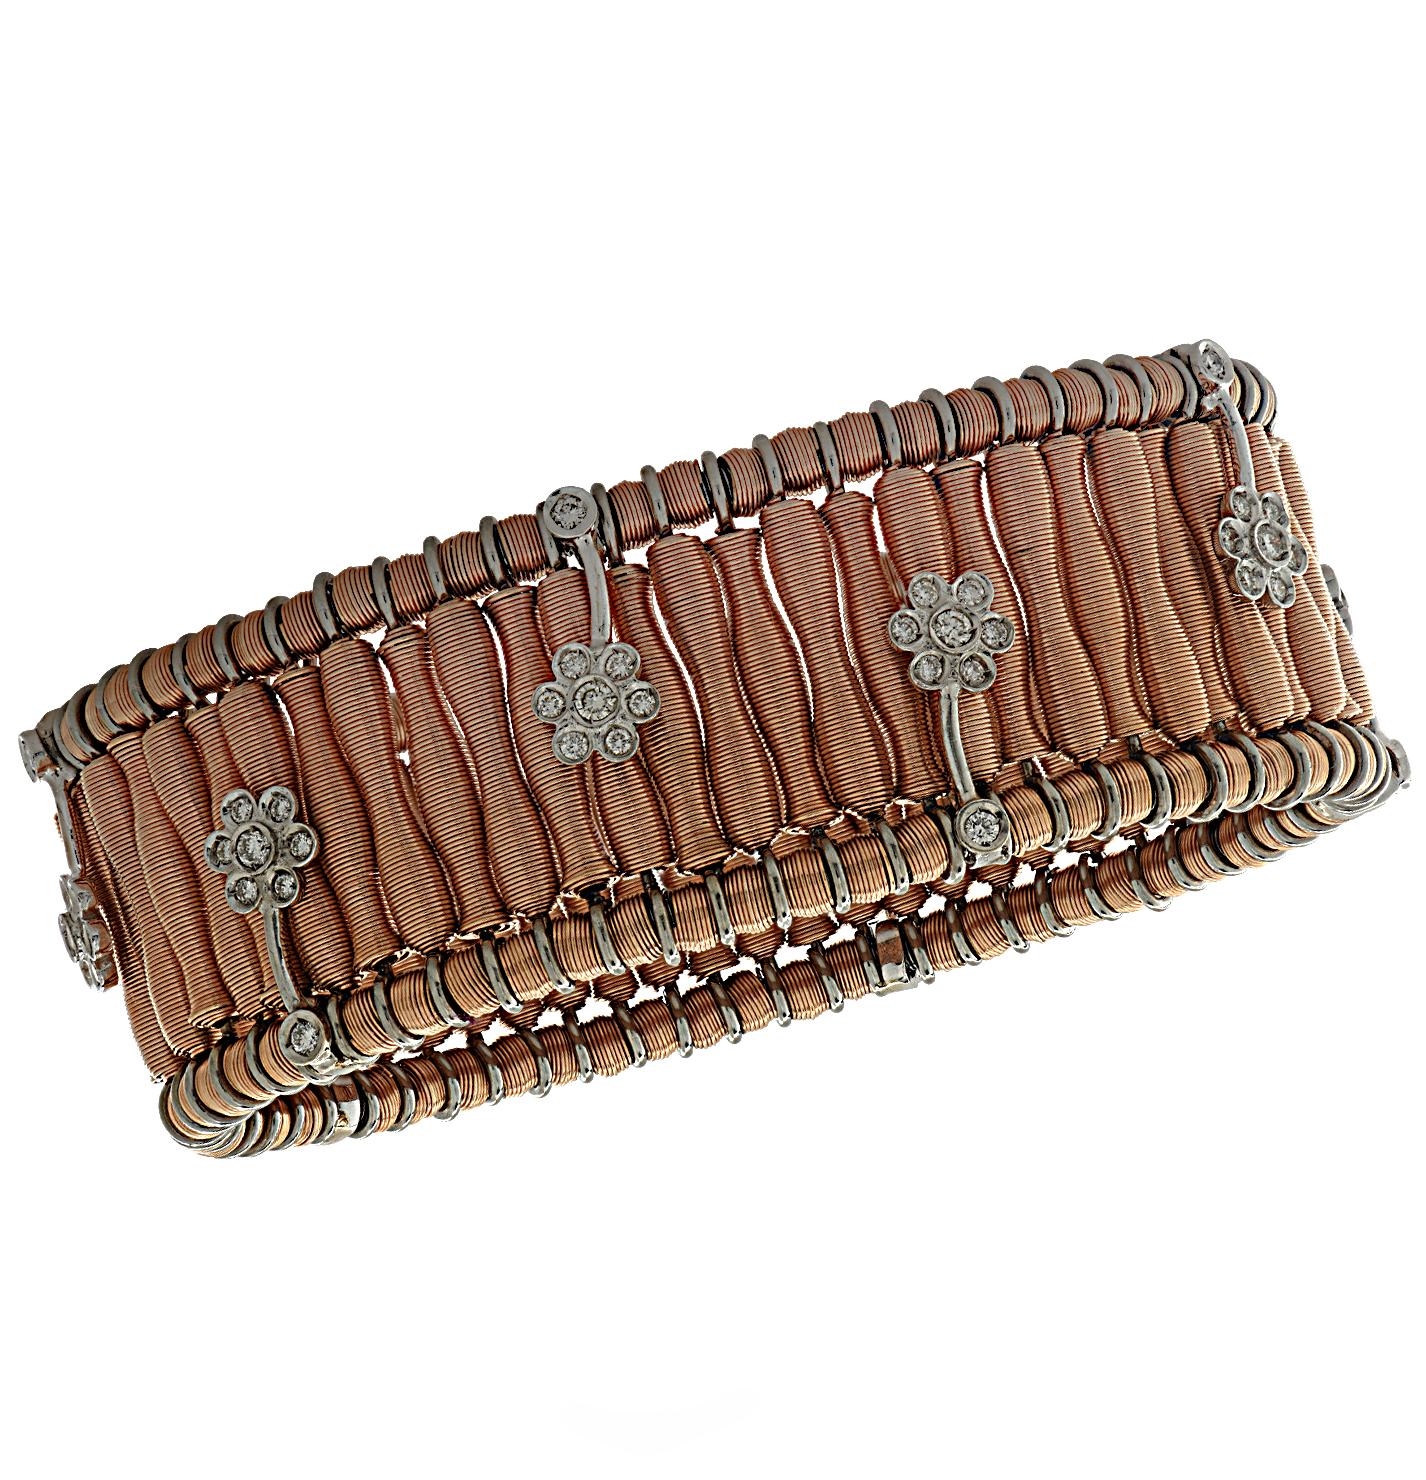 Jarretiere expandable bangle bracelet expertly crafted in Italy in 18 karat rose gold, white gold, featuring 80 round brilliant cut diamonds weighing approximately 2 carats total. Rose gold coils are adorned with diamonds, set in white gold and